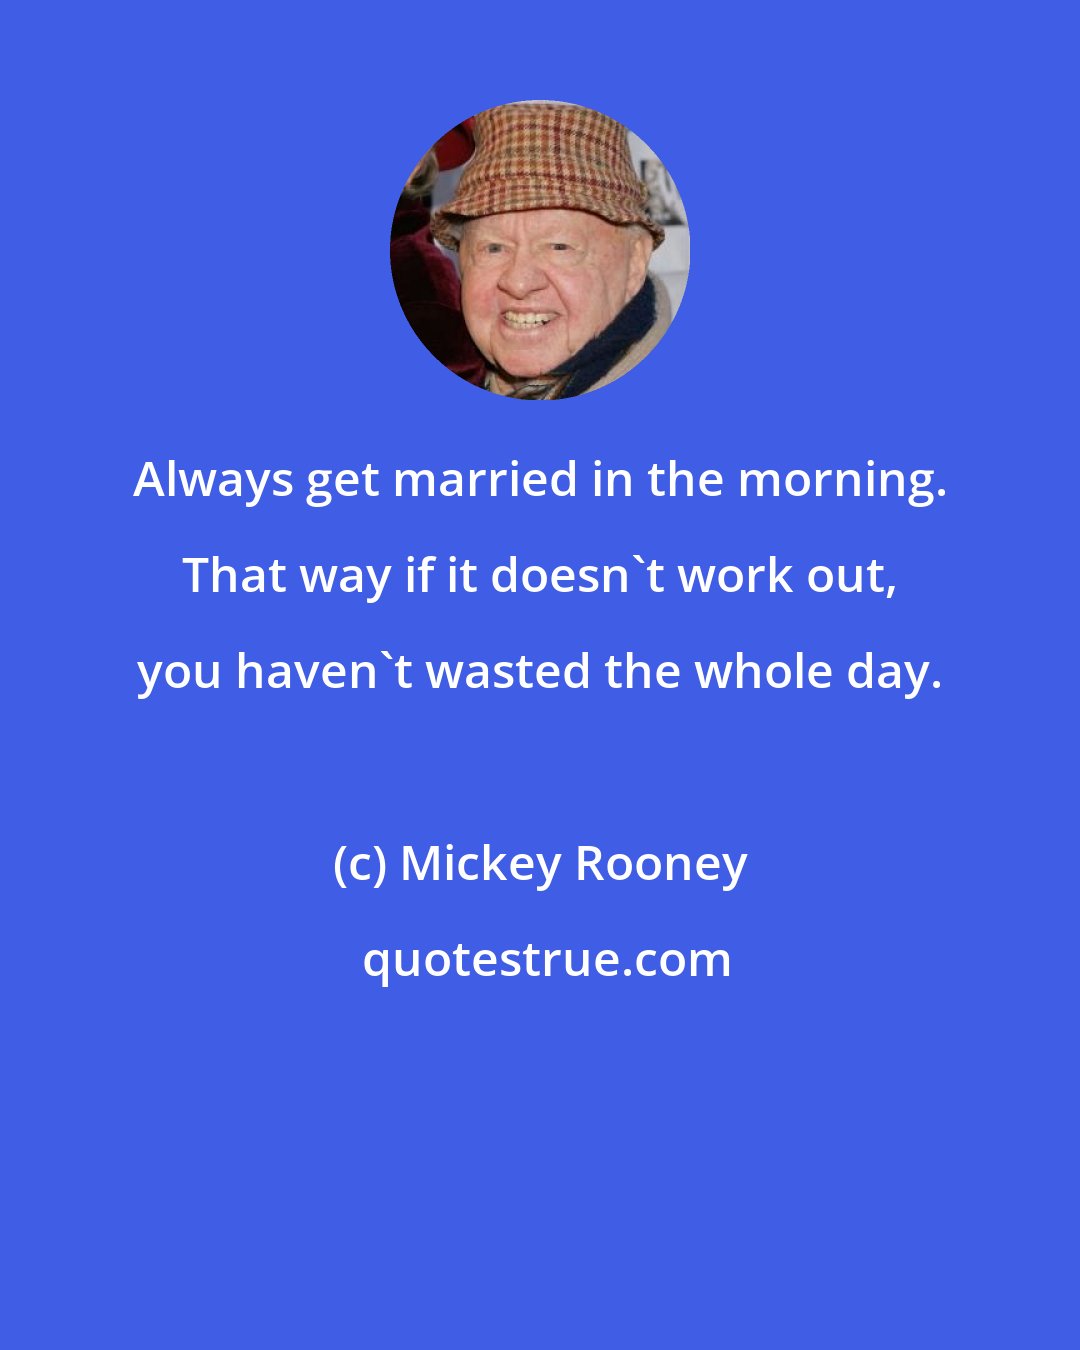 Mickey Rooney: Always get married in the morning. That way if it doesn't work out, you haven't wasted the whole day.